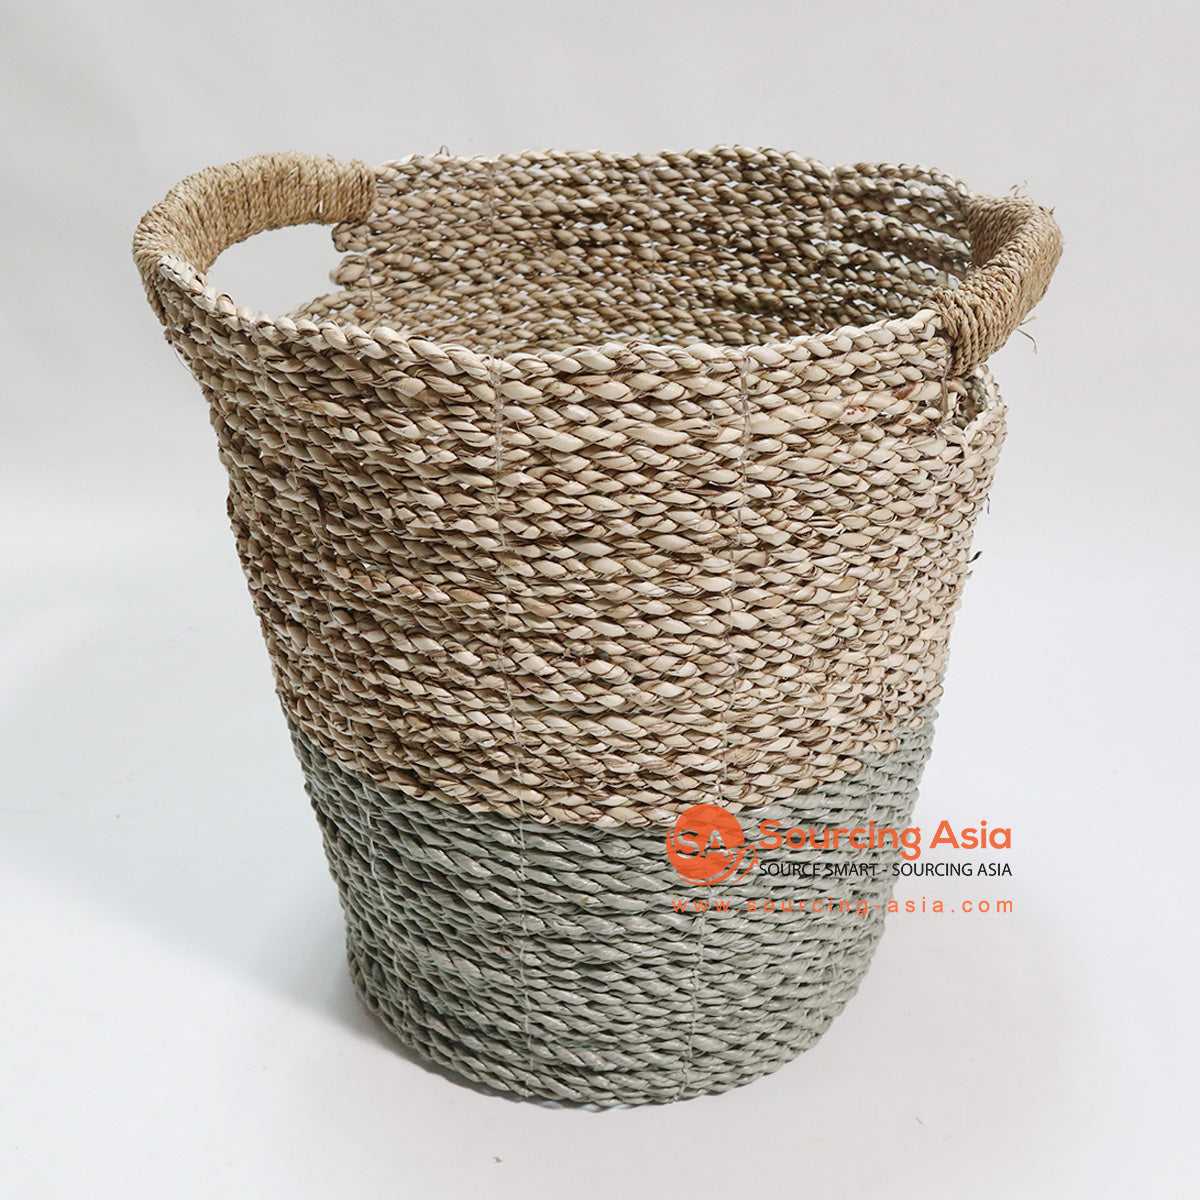 HBSC070 NATURAL AND OLIVE GREEN SEAGRASS ROUND WASTE PAPER BASKET WITH HANDLE